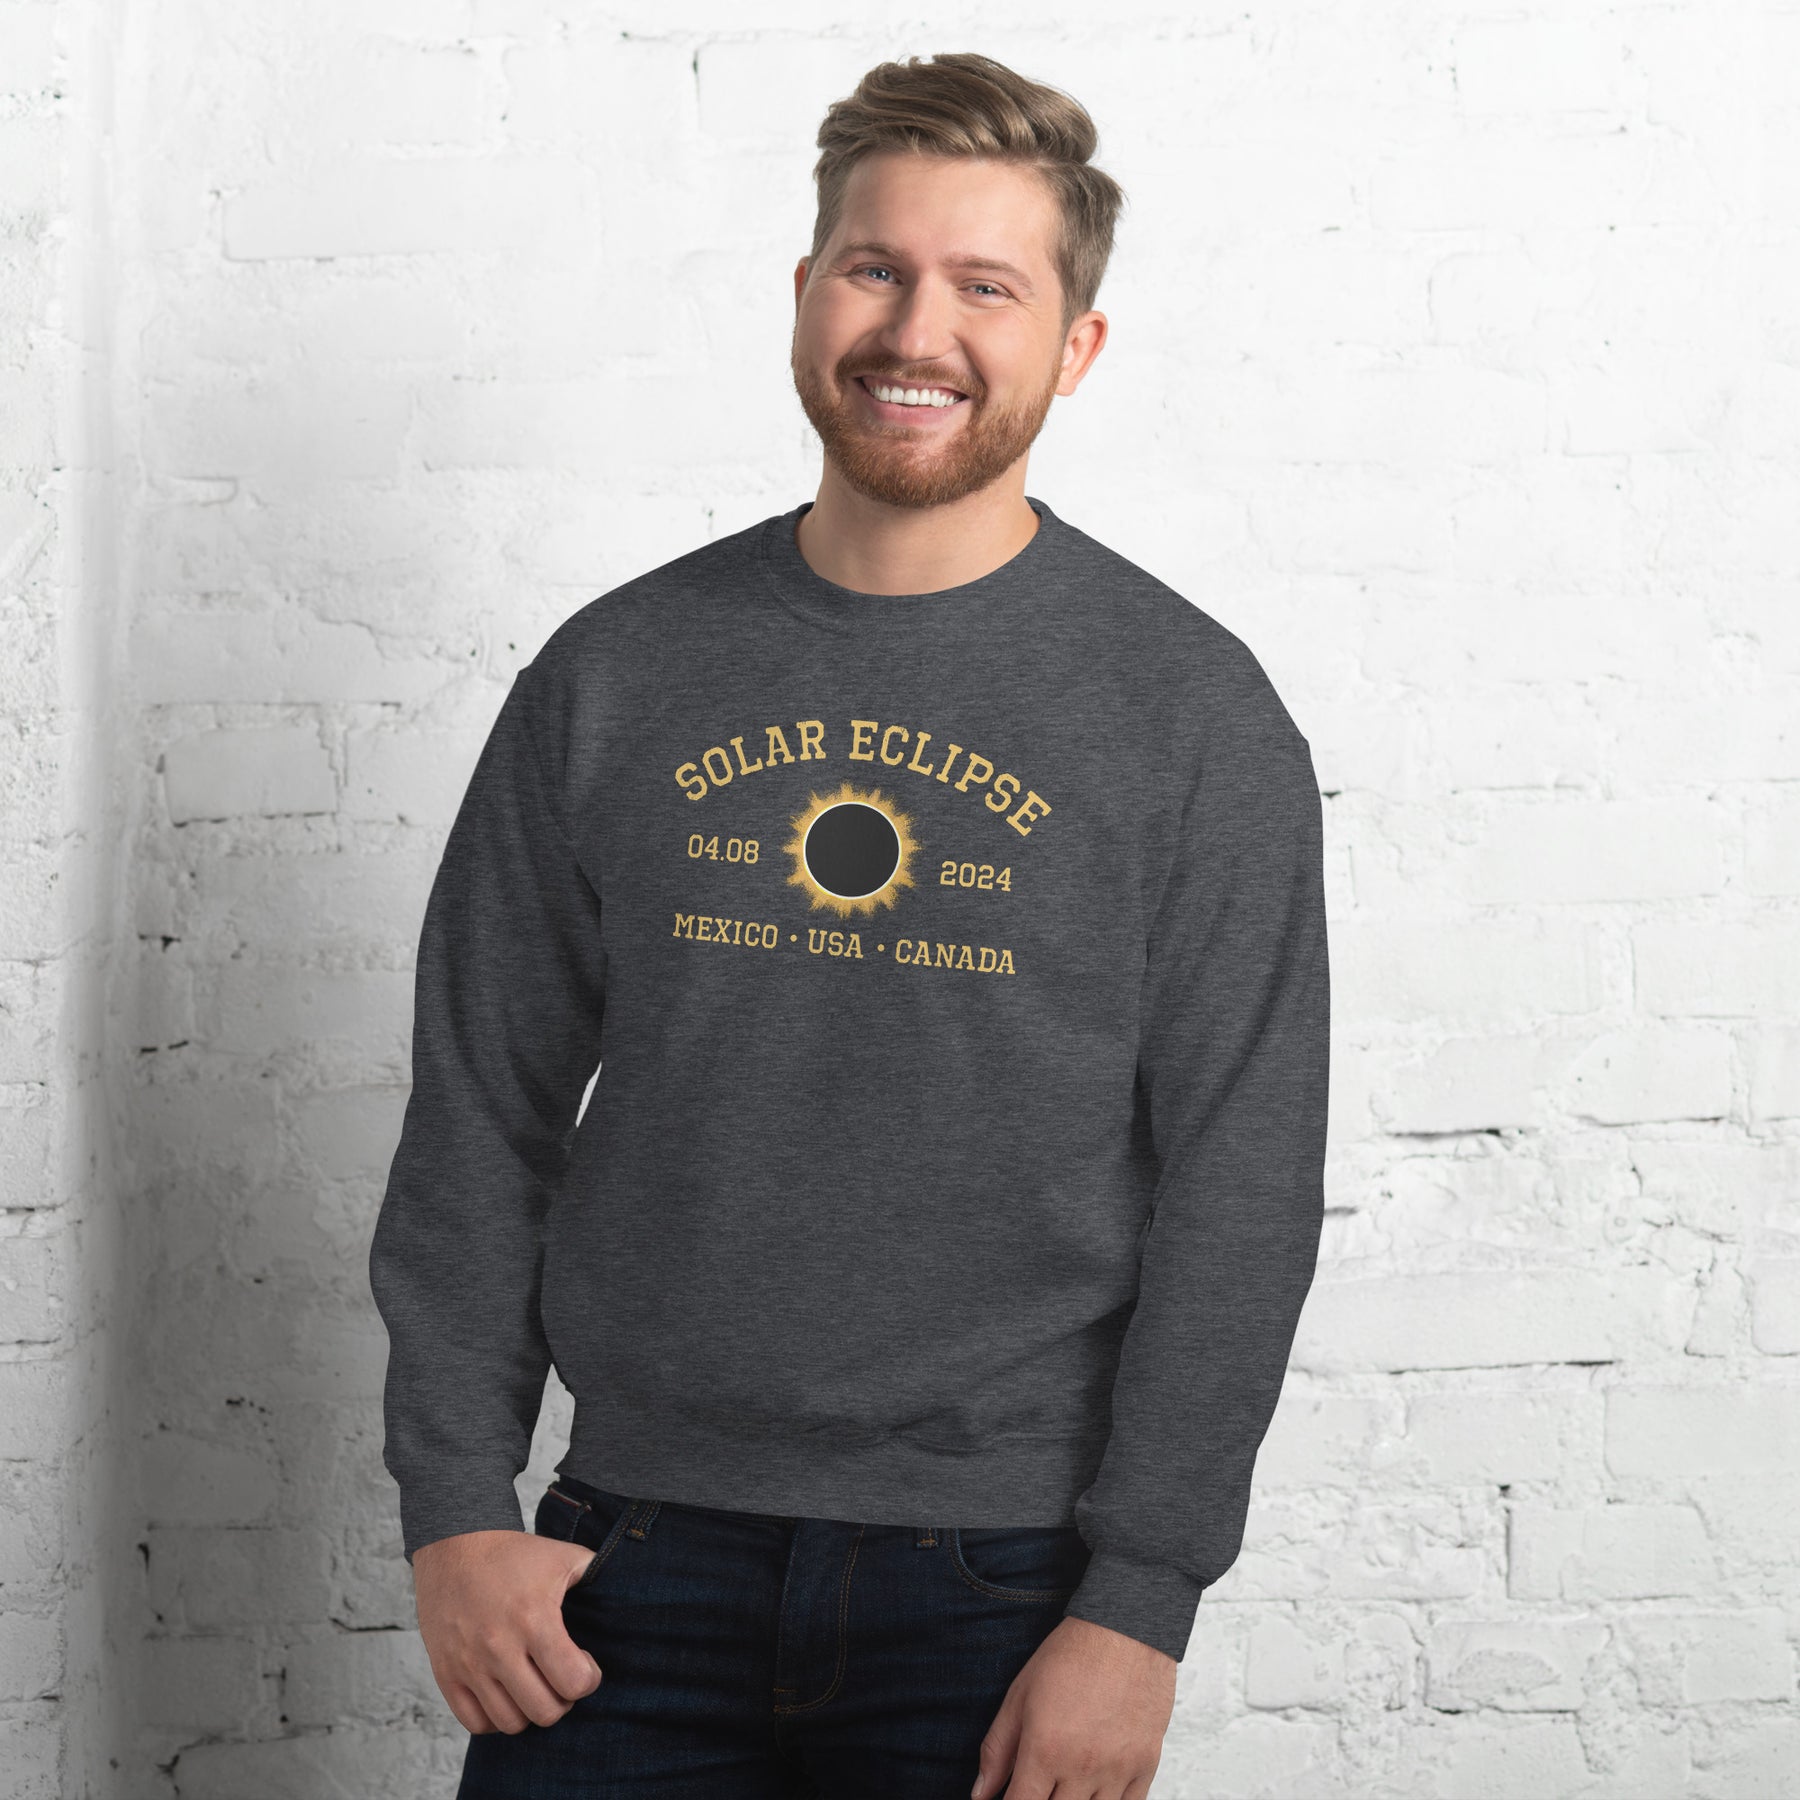 Solar Eclipse Sweatshirt, 04.08 2024, Family Matching Spring Astronomy Eclipse Souvenir Gift, America Totality, Celestial Event Sweater